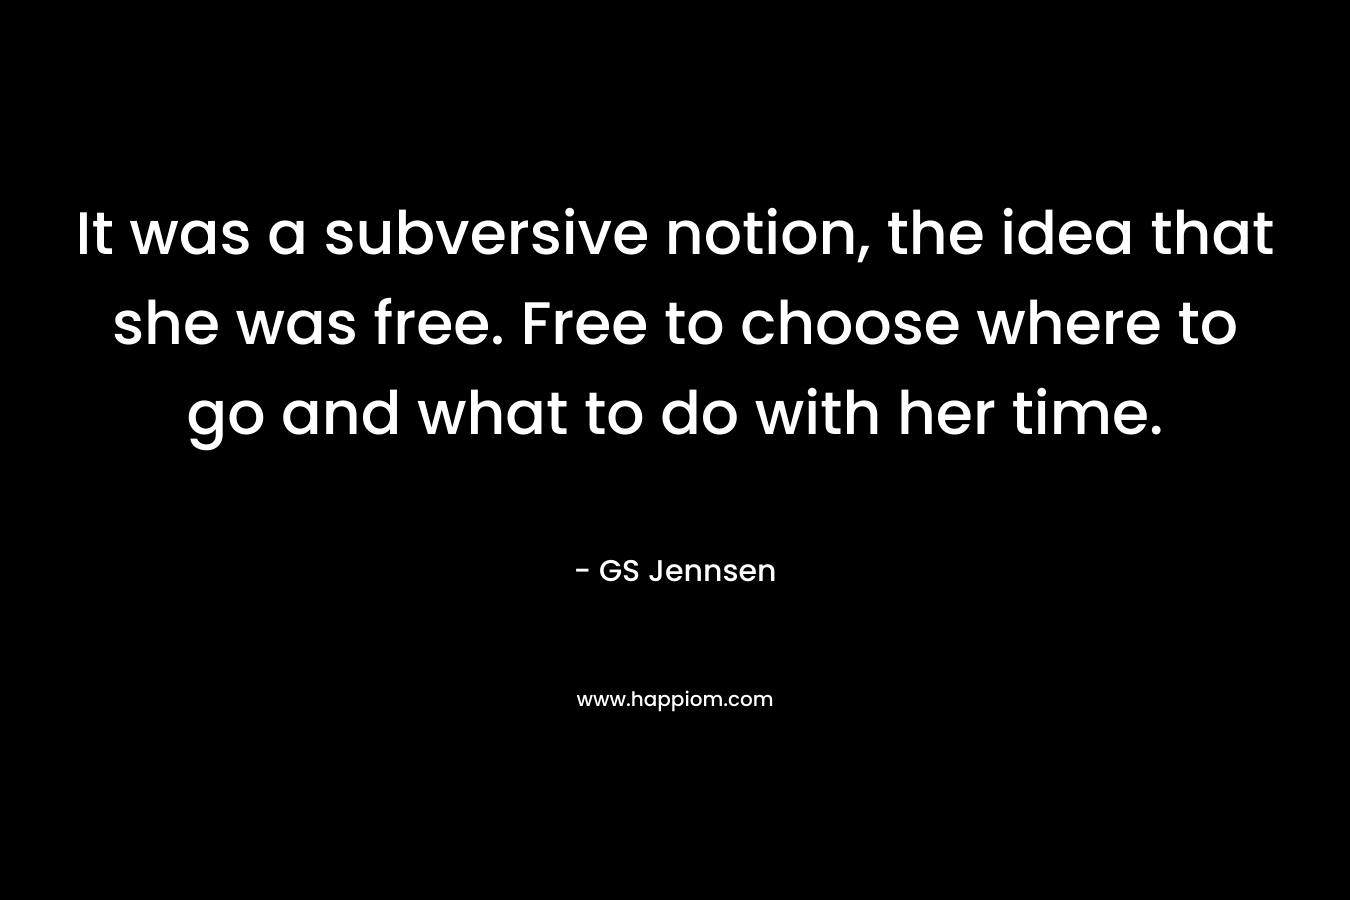 It was a subversive notion, the idea that she was free. Free to choose where to go and what to do with her time.